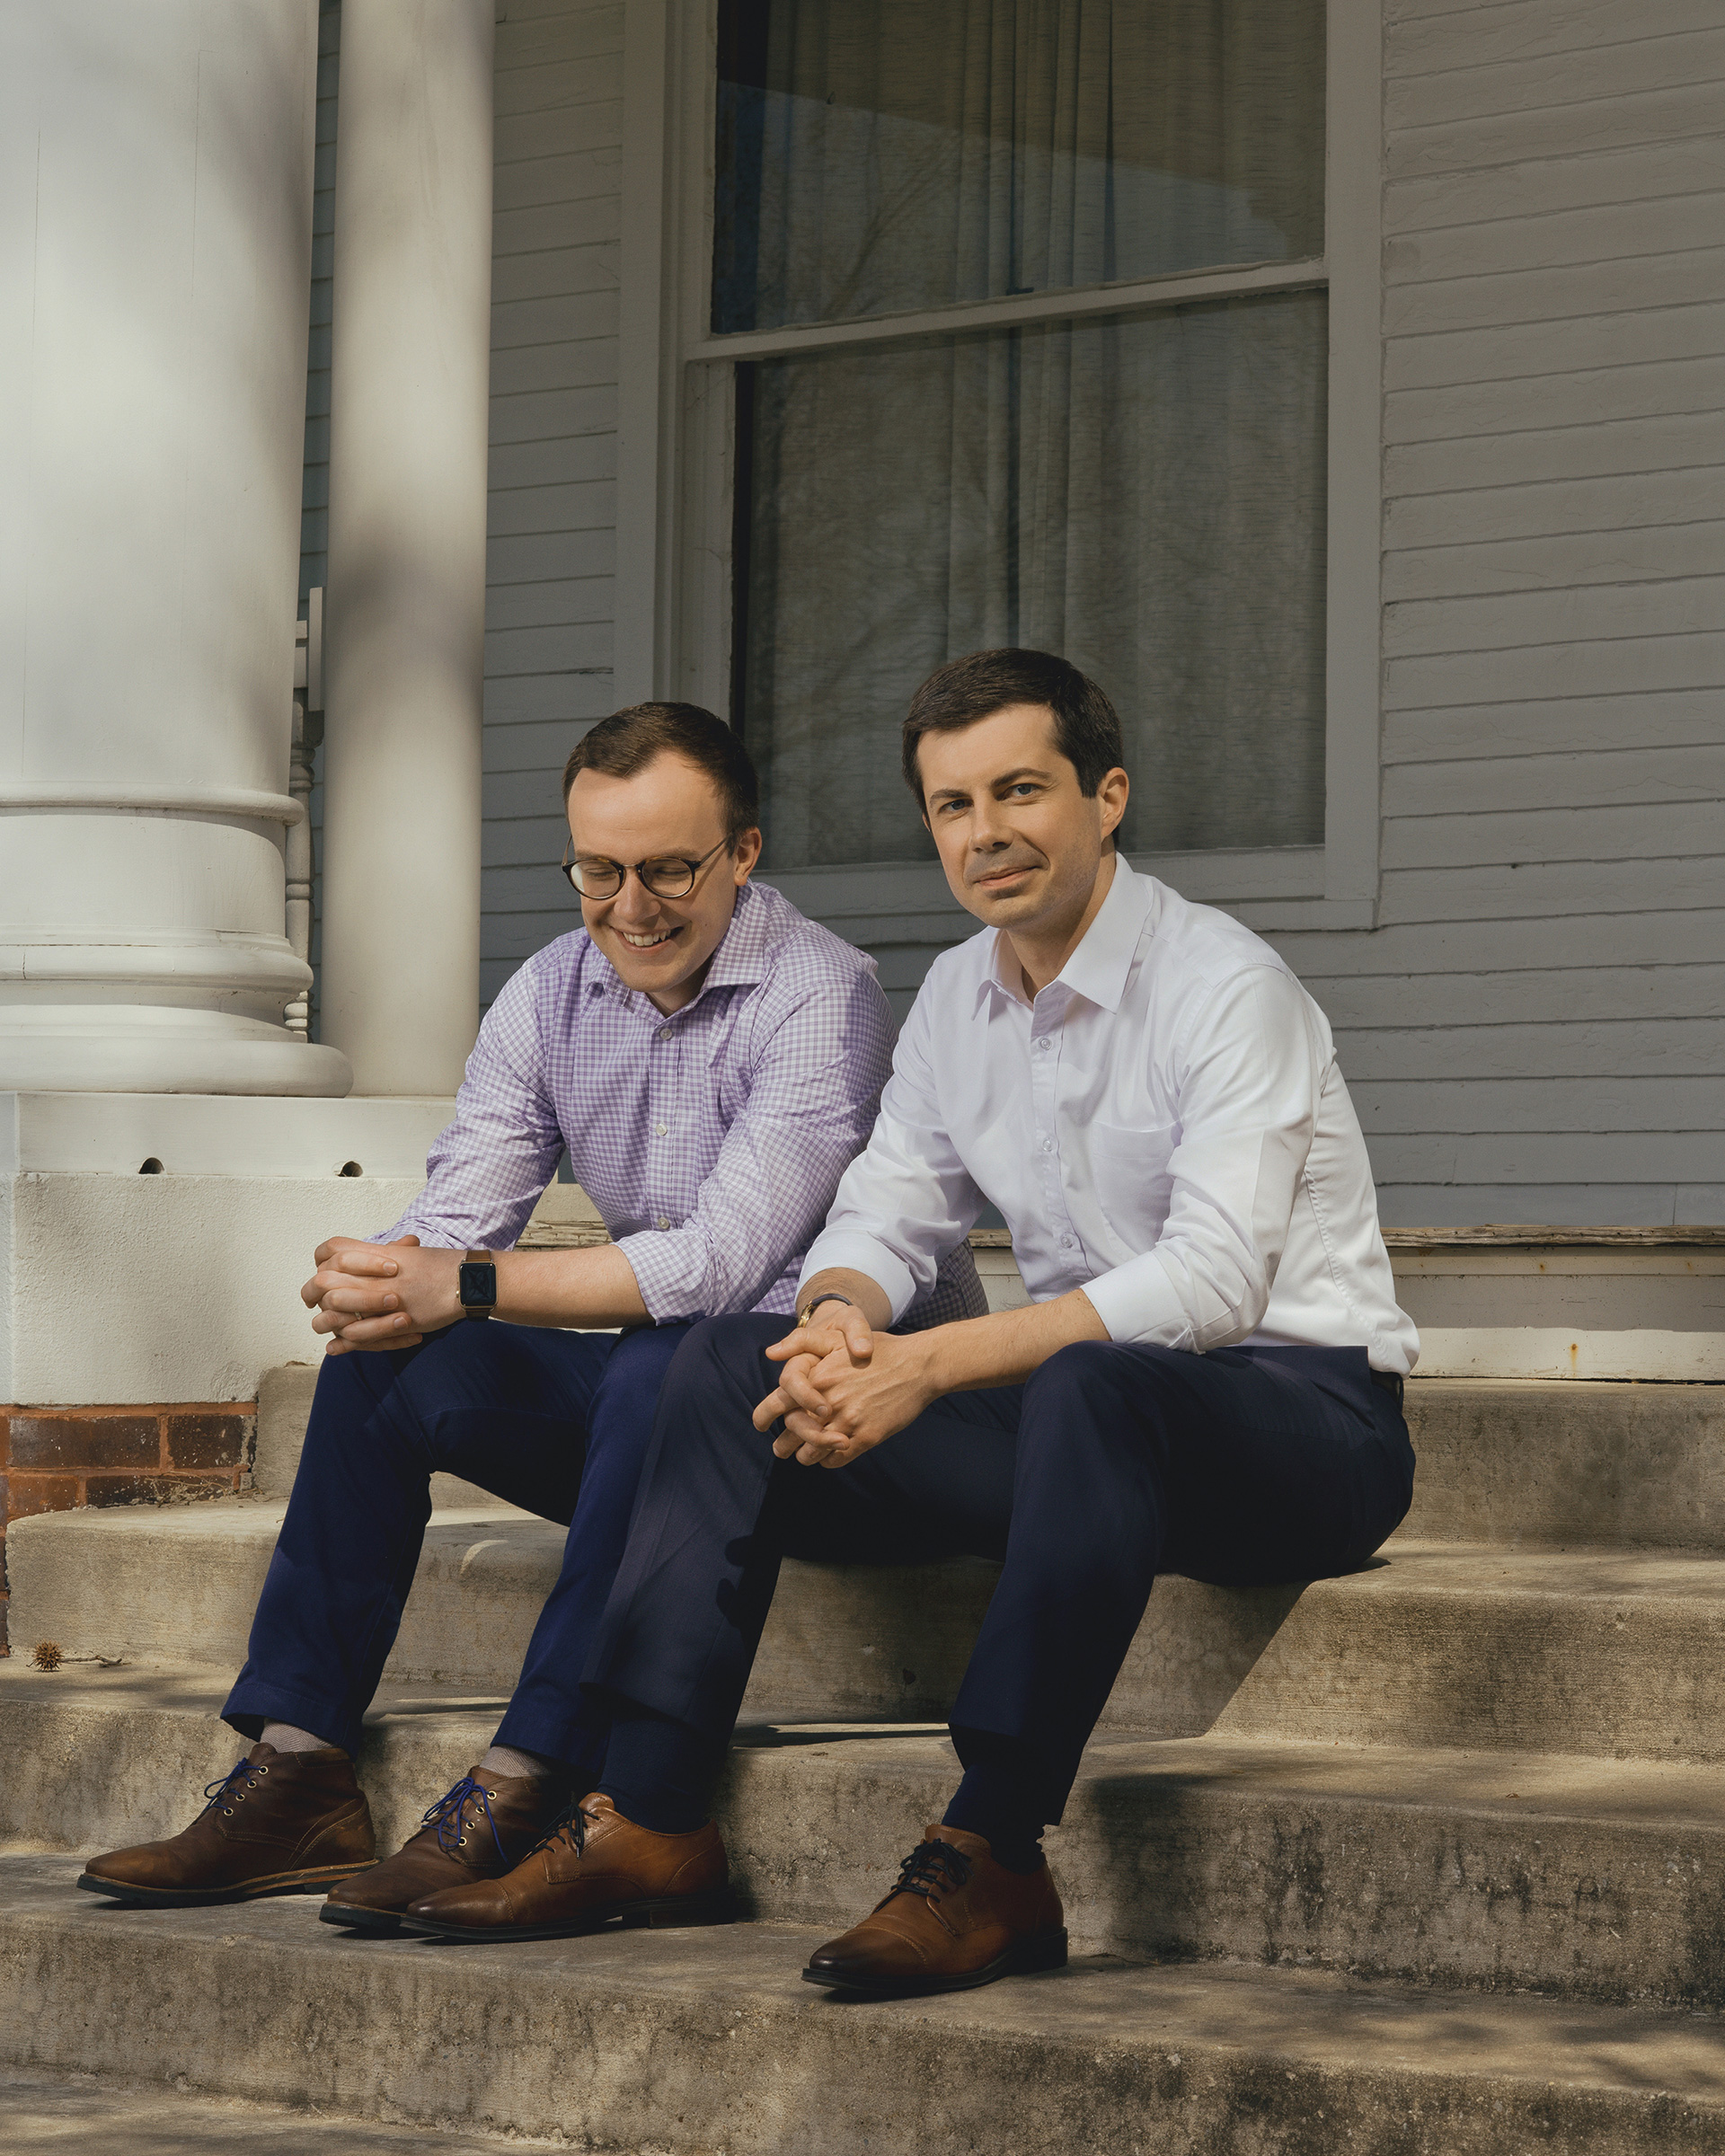 Chasten Glezman and Mayor Pete Buttigieg on the front steps of their home in South Bend, Ind. (Ryan Pfluger for TIME)